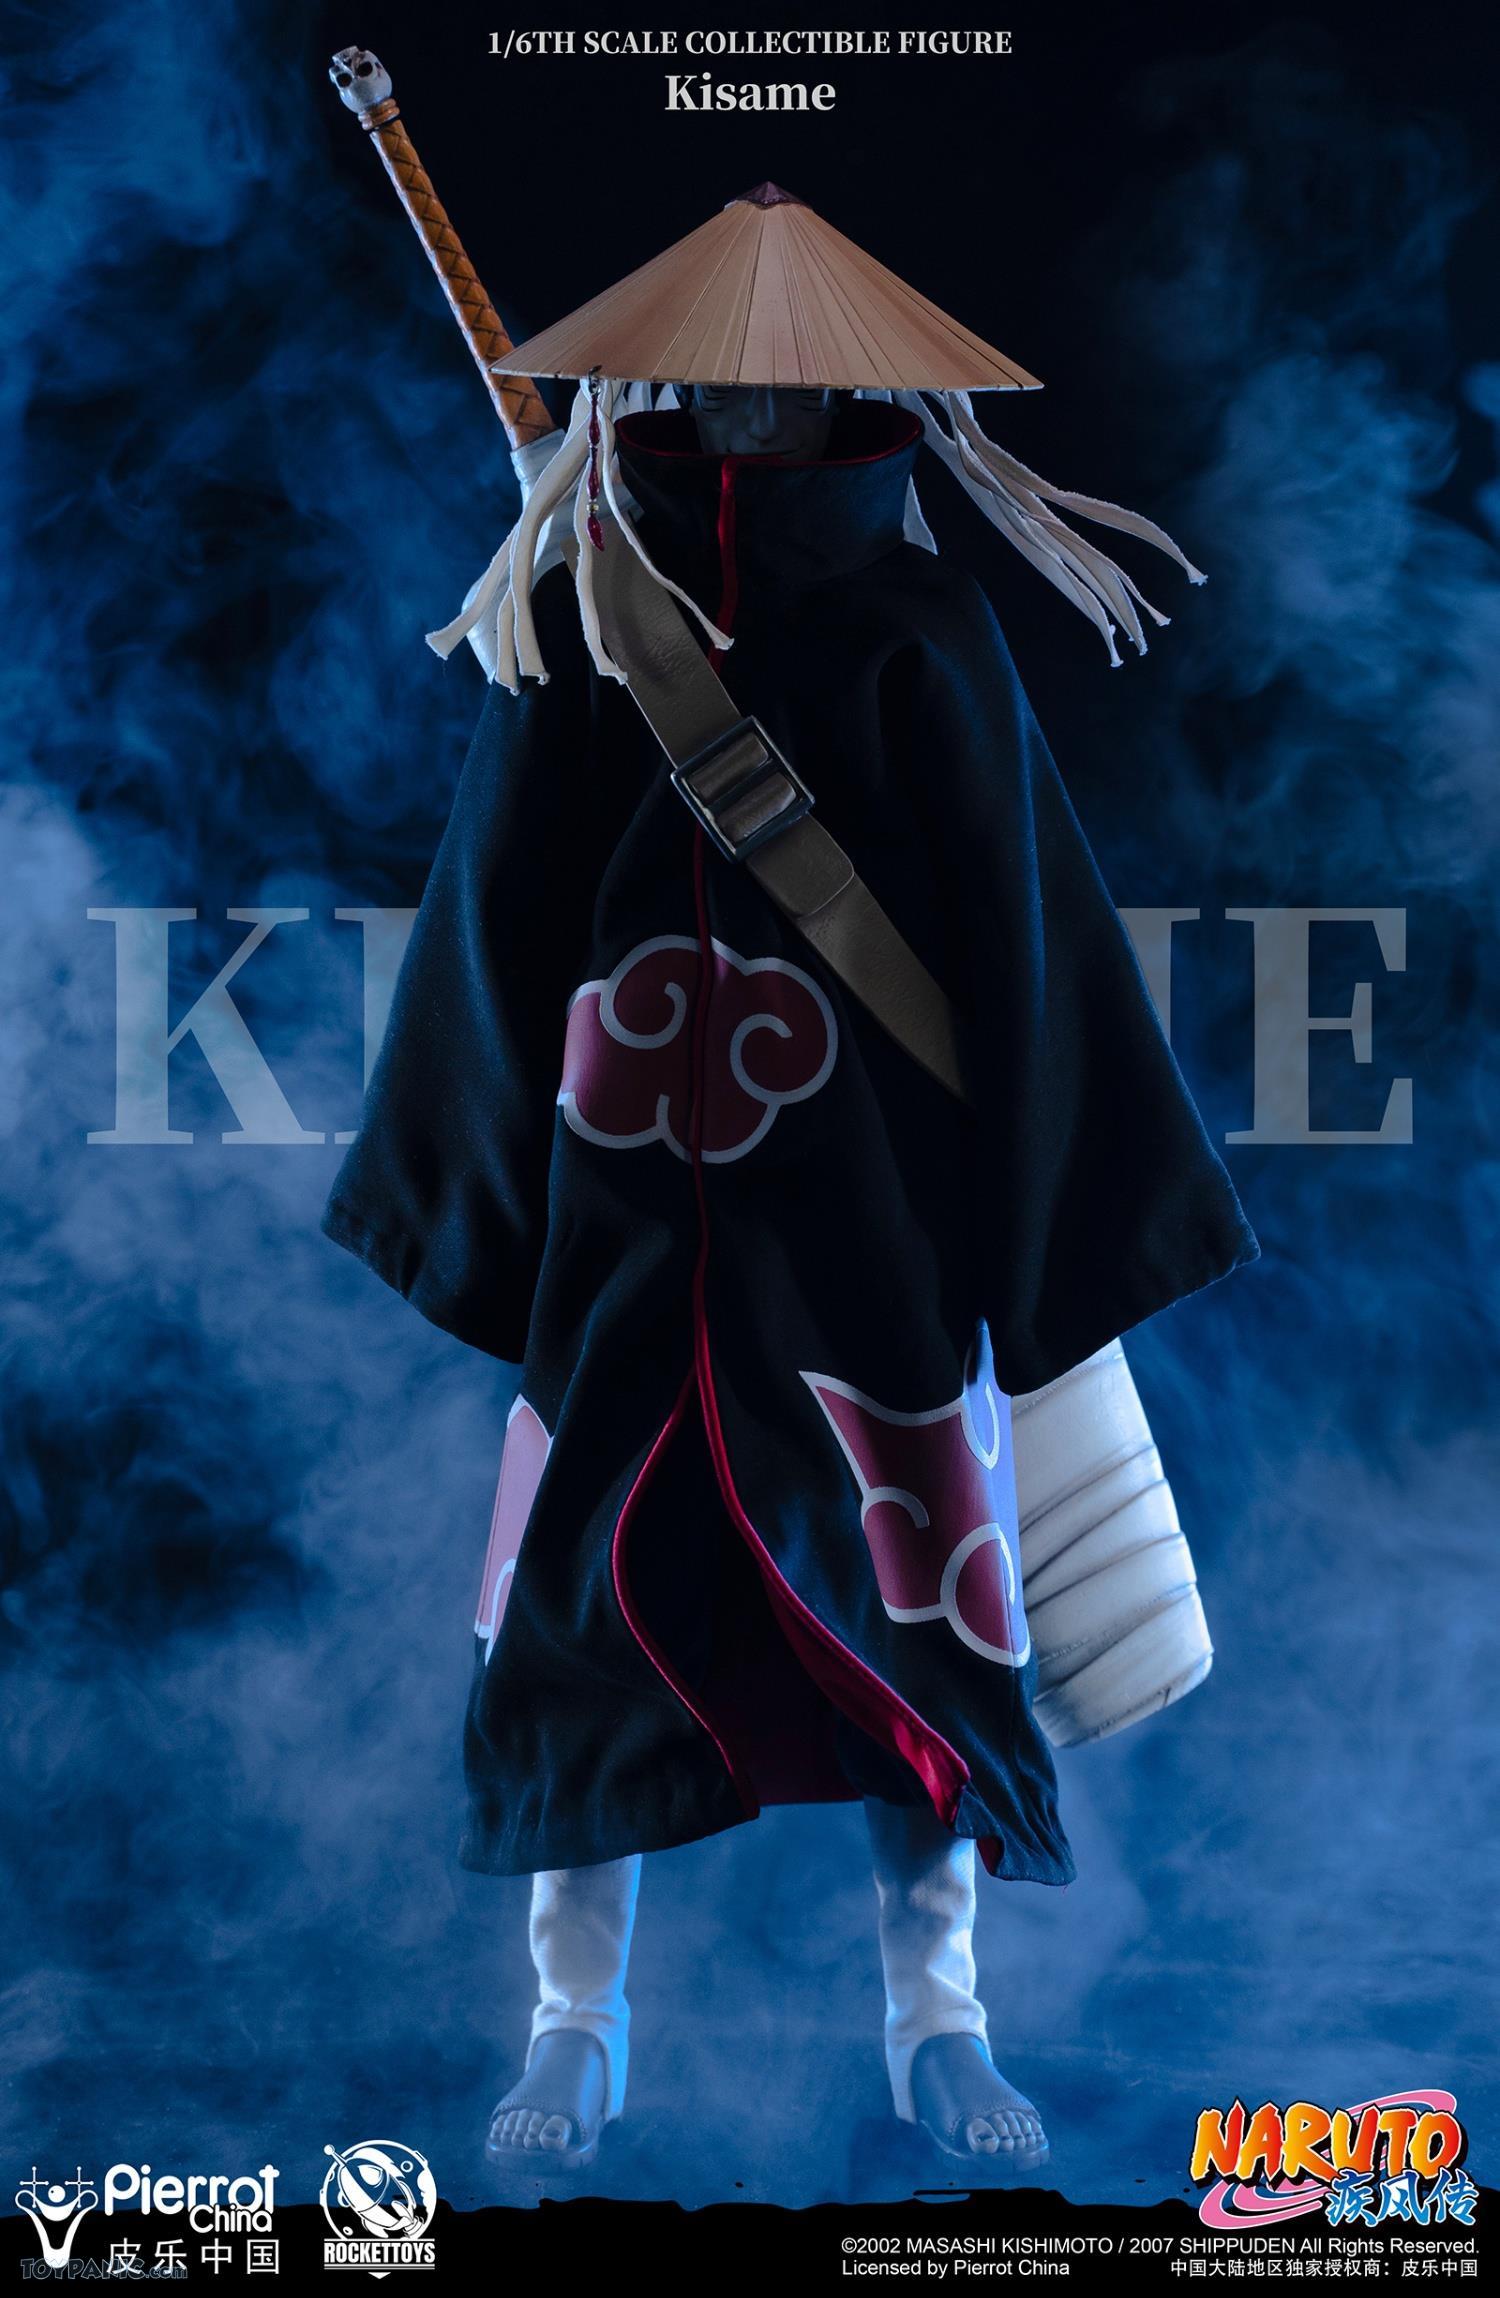 NEW PRODUCT: Rocket Toys ROC-007 1/6 Scale Kisame 221202460438PM_9230500